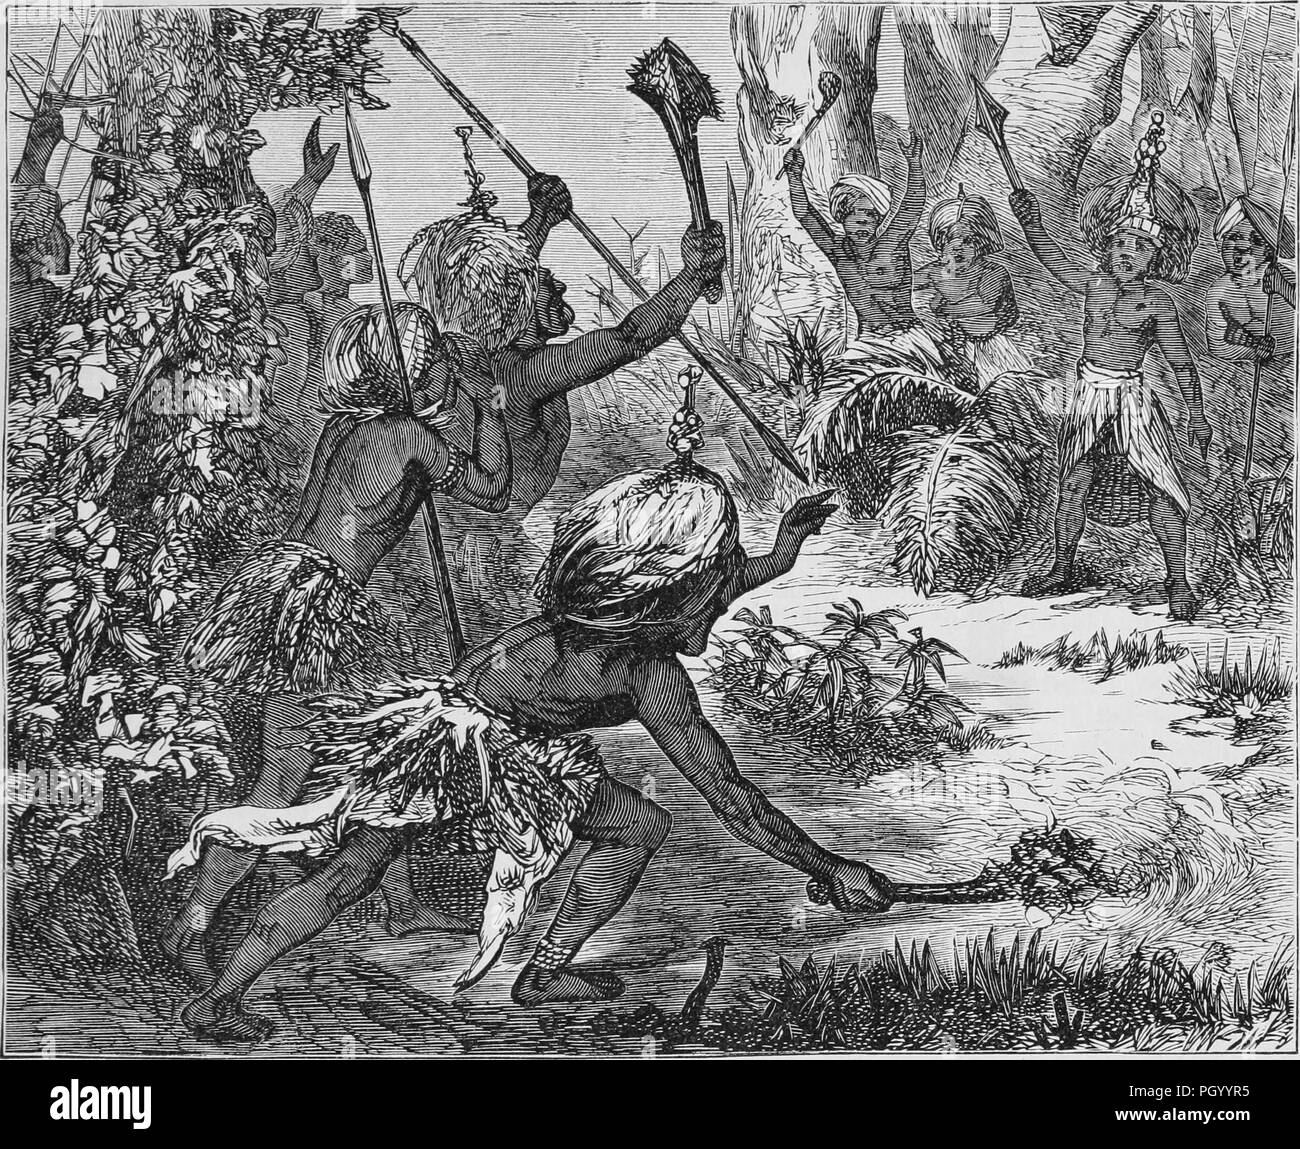 Black and white vintage print, depicting two adversarial Samoan factions, standing on either side of a clearing, dressed in war clothes (including feathered headdresses) waving their weapons at each other while exchanging verbal insults as a precursor to battle, published in John George Wood's volume 'The uncivilized races of men in all countries of the world, being a comprehensive account of their manners and customs, and of their physical, social, mental, moral and religious characteristics', 1877. Courtesy Internet Archive. () Stock Photo